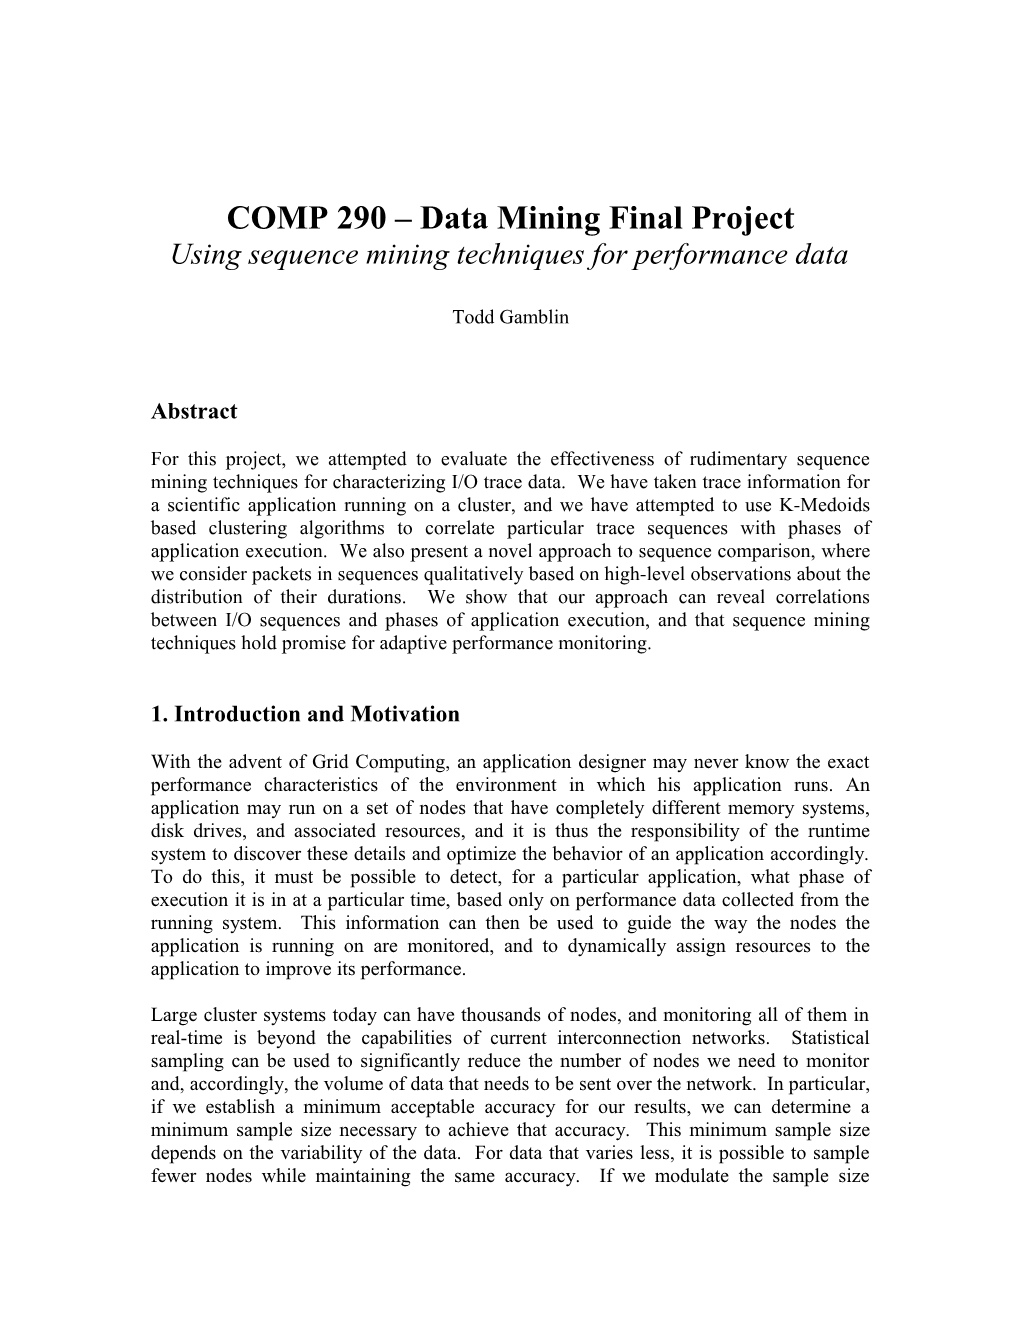 COMP 290 Data Mining Final Project